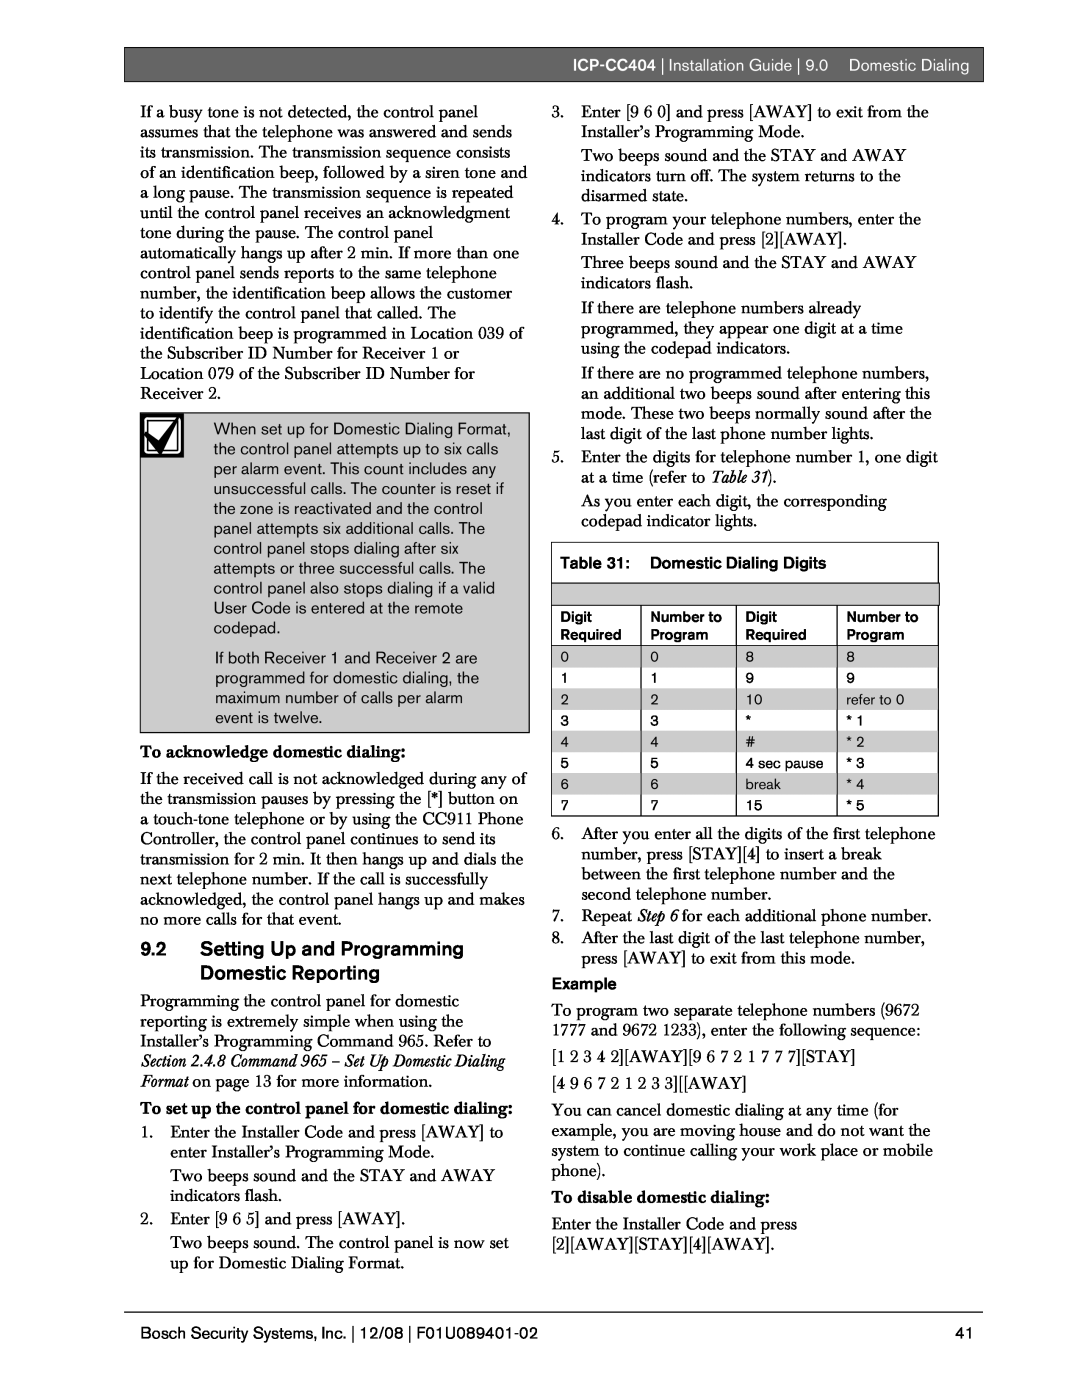 Bosch Appliances ICP-CC404 manual 9.2Setting Up and Programming Domestic Reporting, Domestic Dialing Digits, Example 